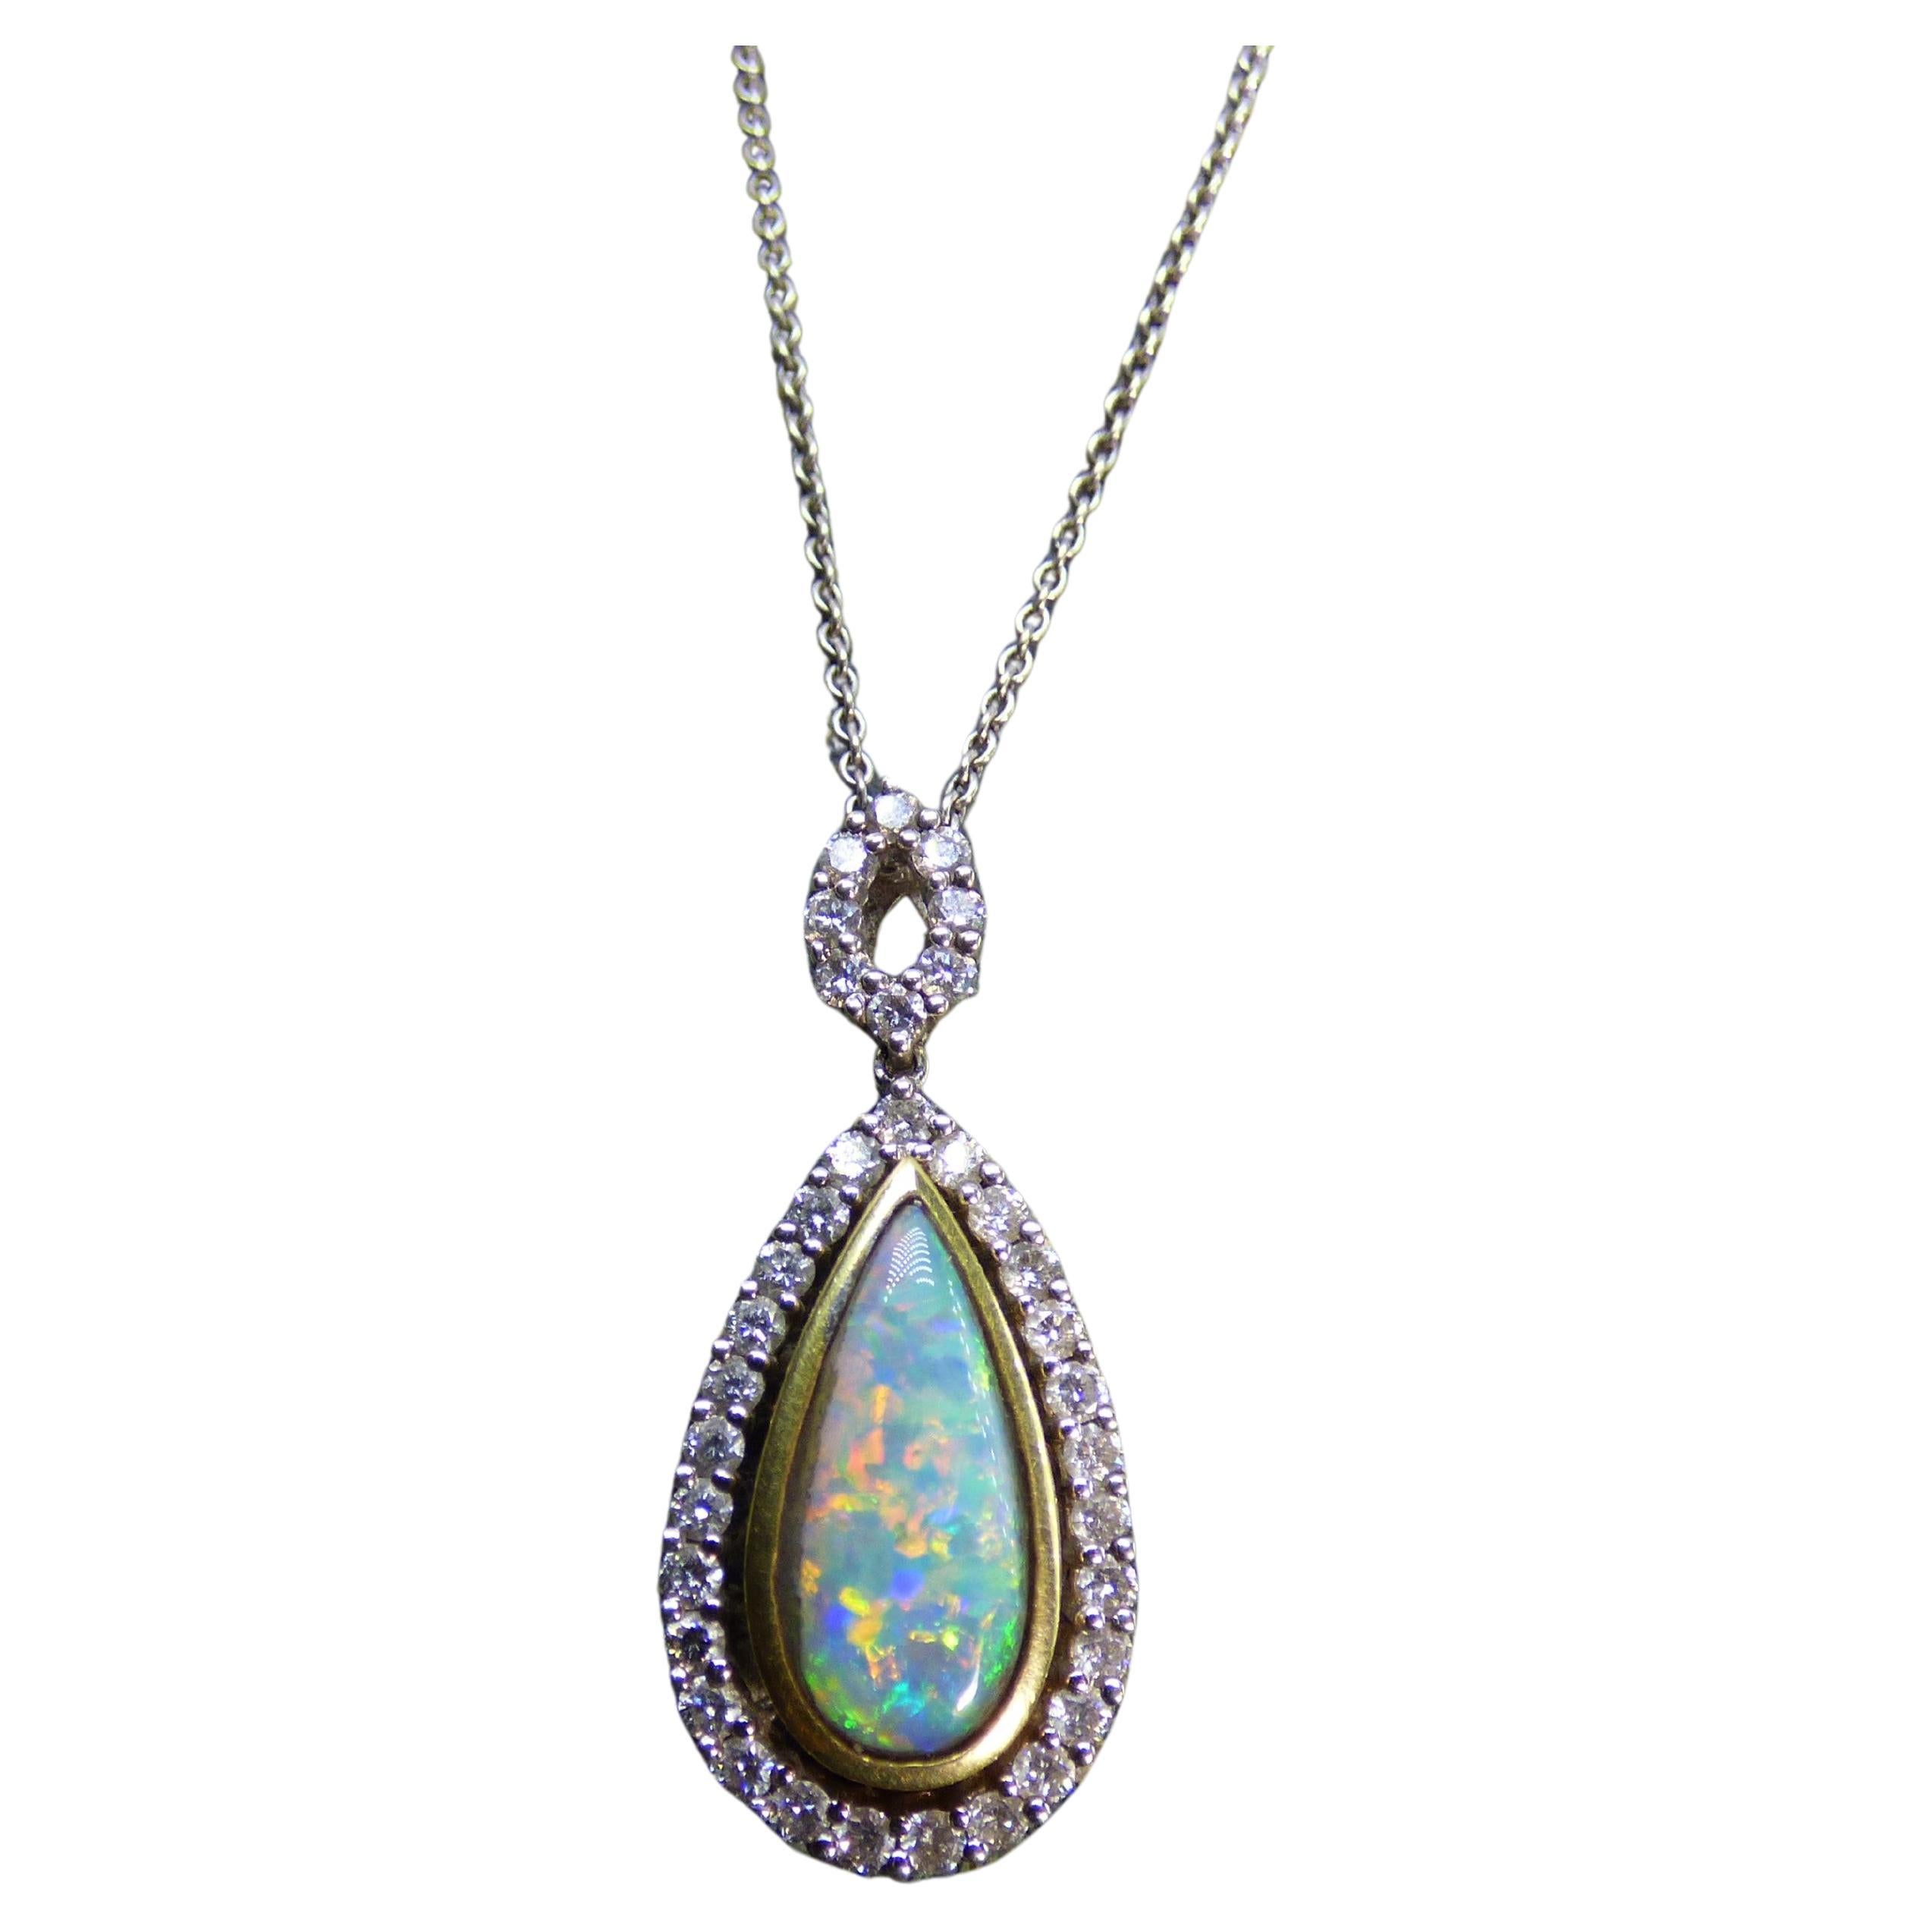 Long pear shaped Opal and Diamond Pendant with 18" chain in 18K gold.